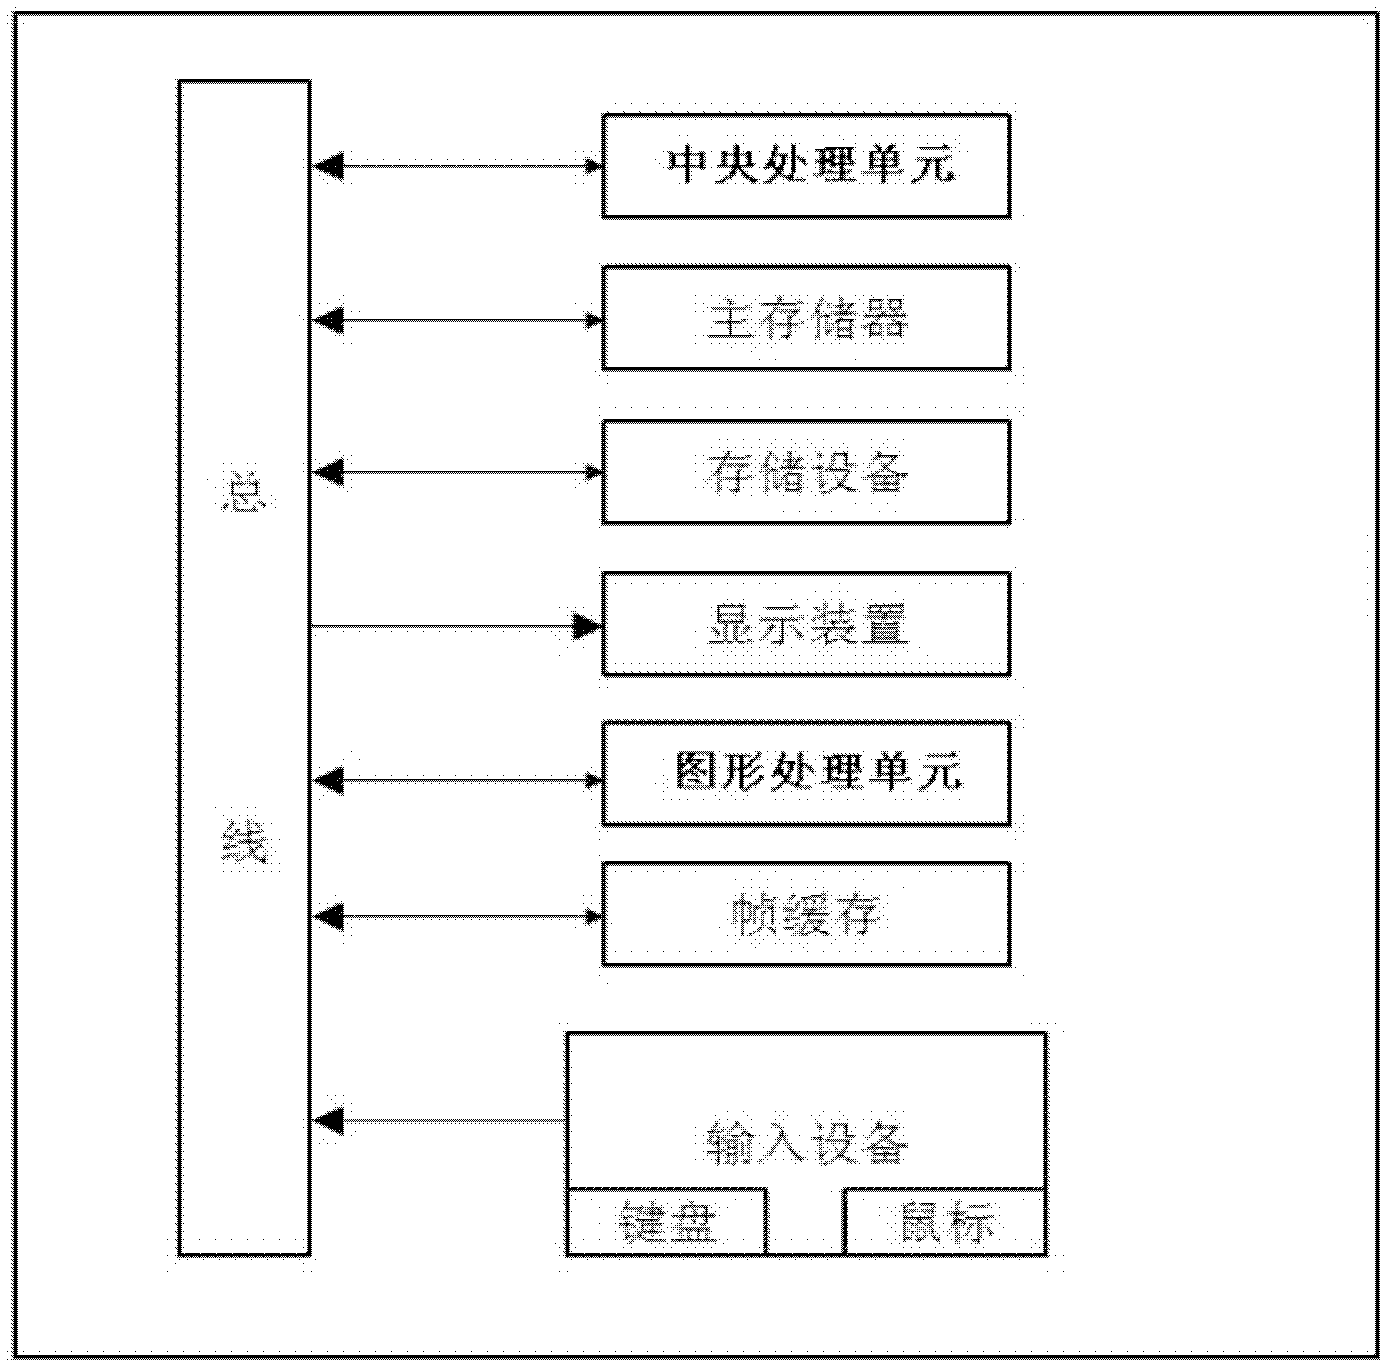 Diversity analysis method based on chemical structure with CPU (Central Processing Unit) acceleration